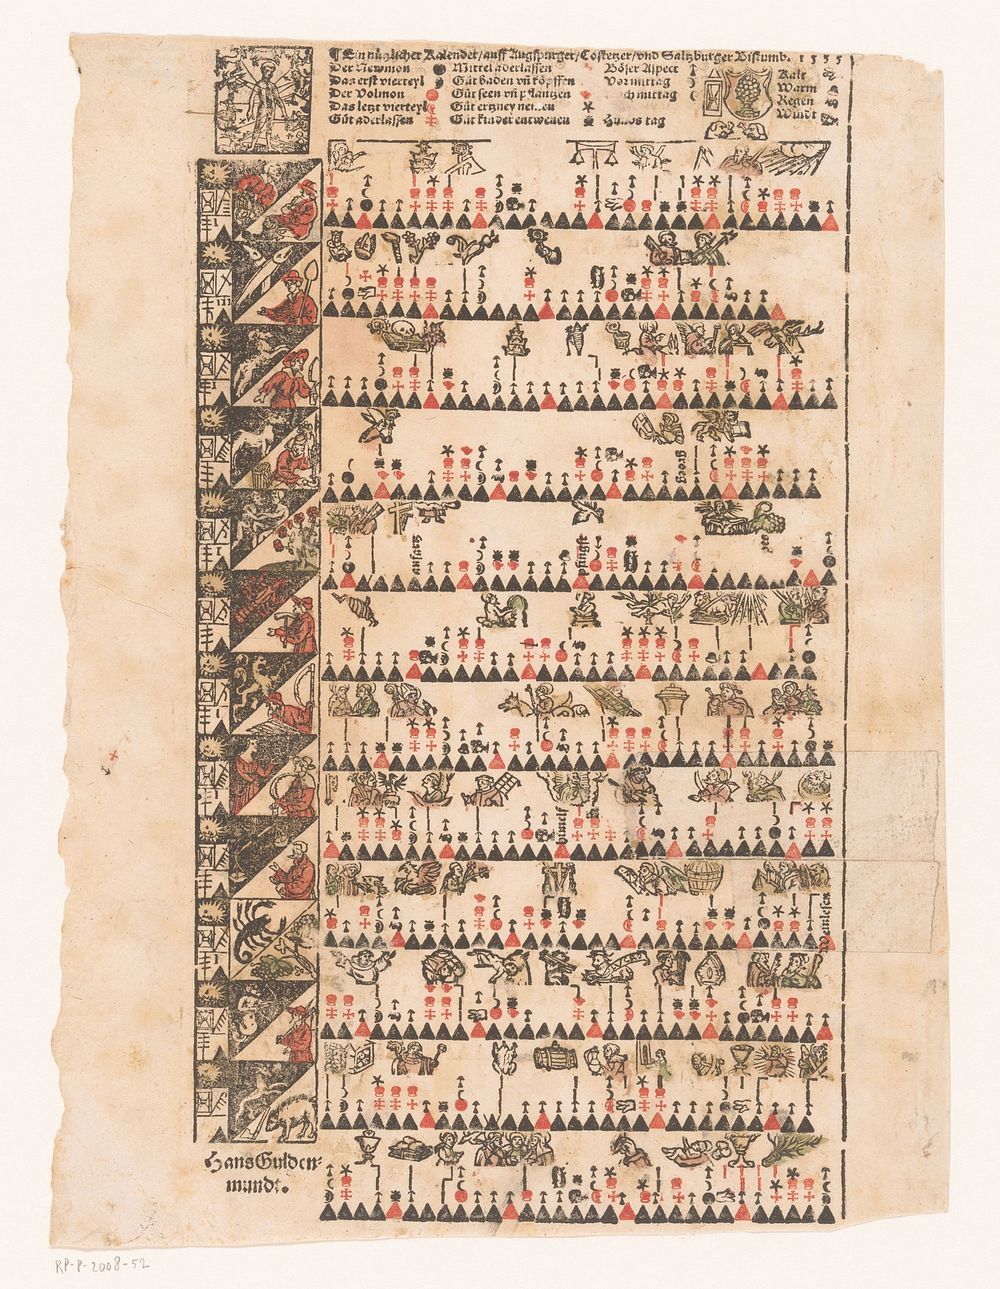 Kalender (1555) by anonymous and Hans Guldenmund